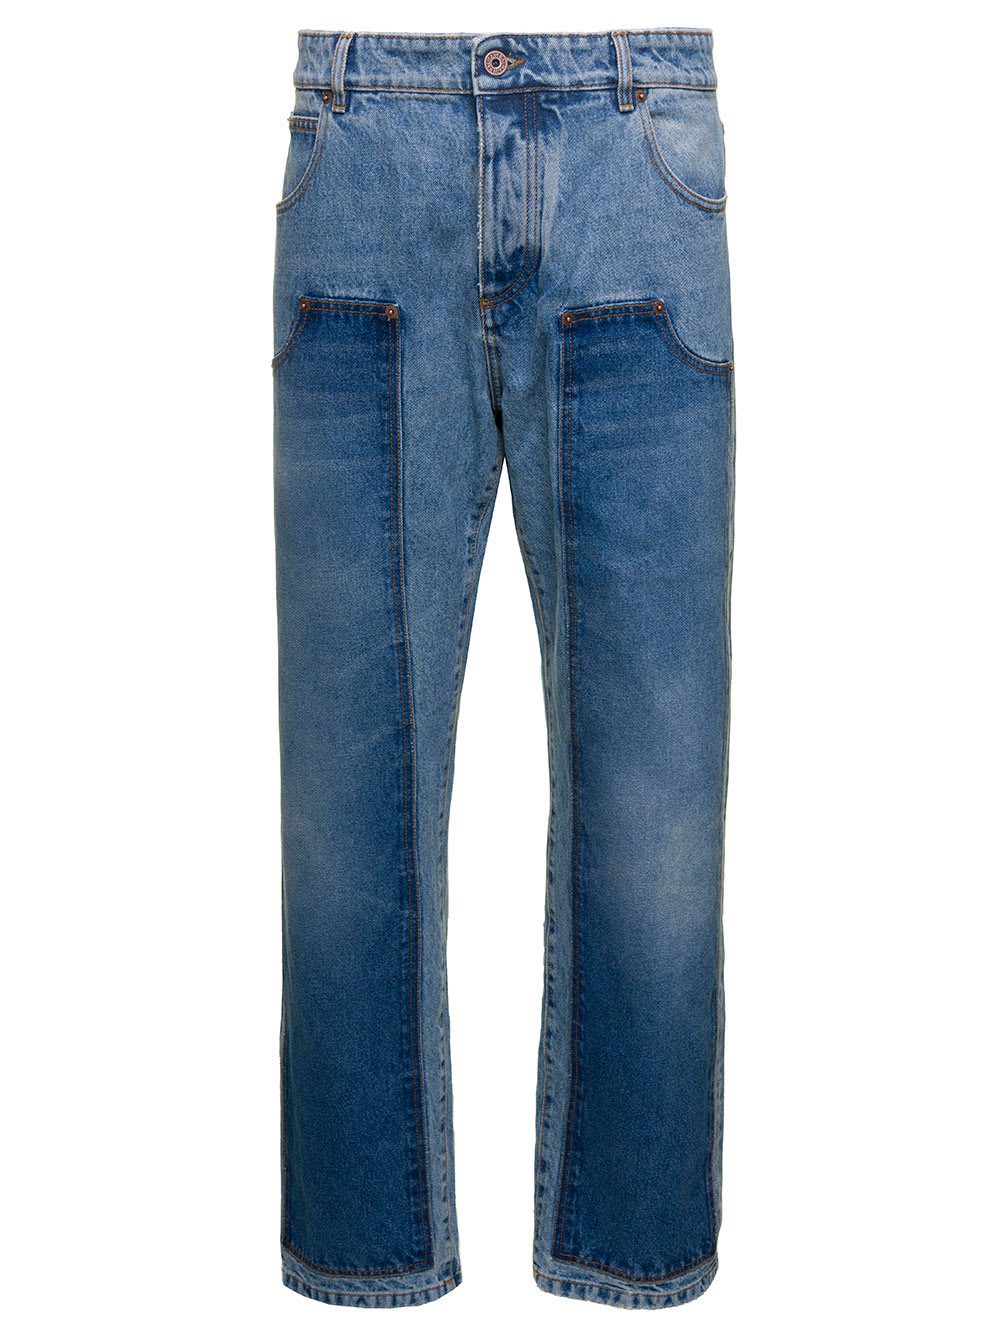 BALMAIN LIGHT BLUE PATCHWORK STRAIGHT JEANS WITH LOGO PATCH IN COTTON DENIM MAN